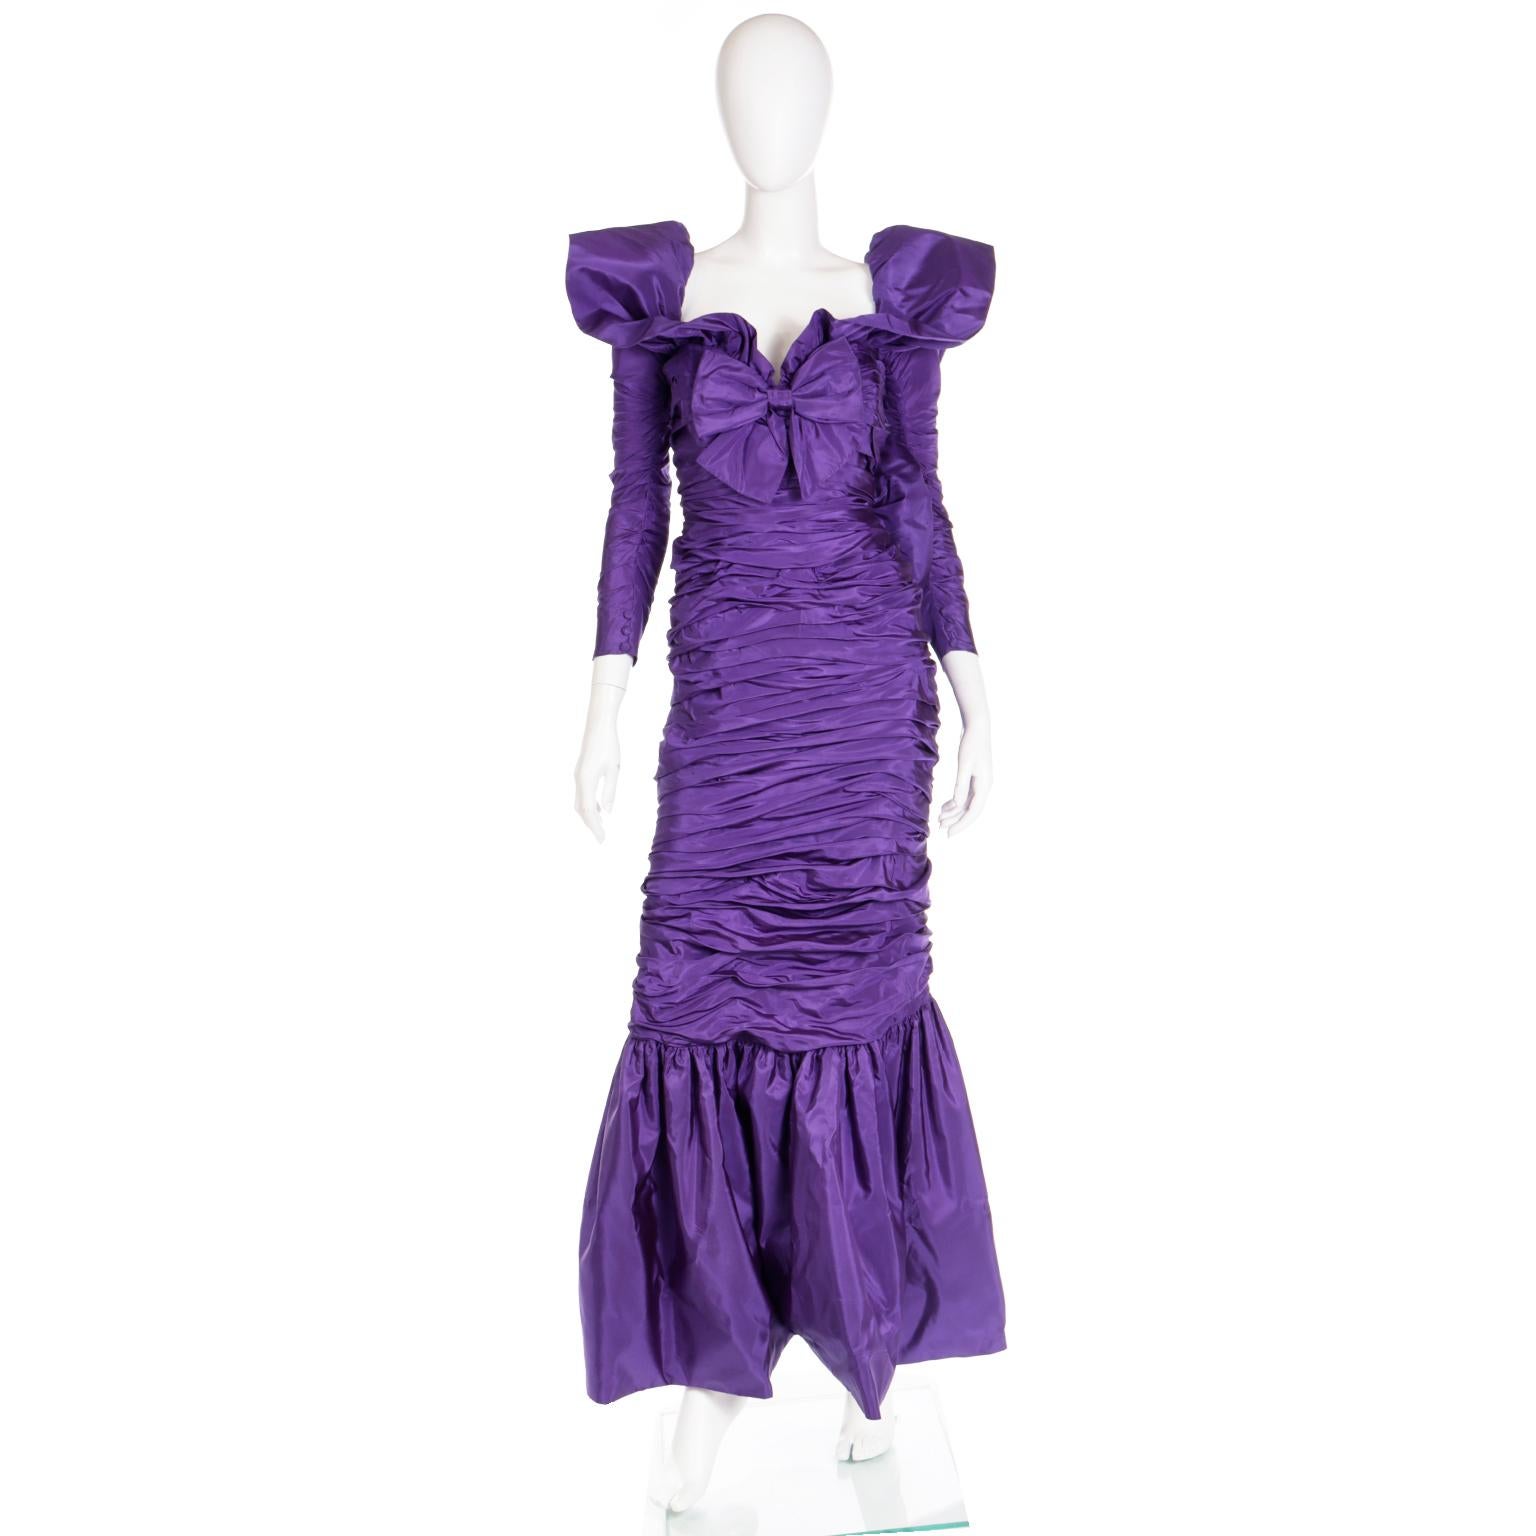 This vintage 1980's Isabelle Allard evening gown is a good example of why we love the 1980's. You just can't find the details and quality anymore and this gorgeous purple dress is stunning! Purchased at Henri Bendel in the 80's, this  purple taffeta